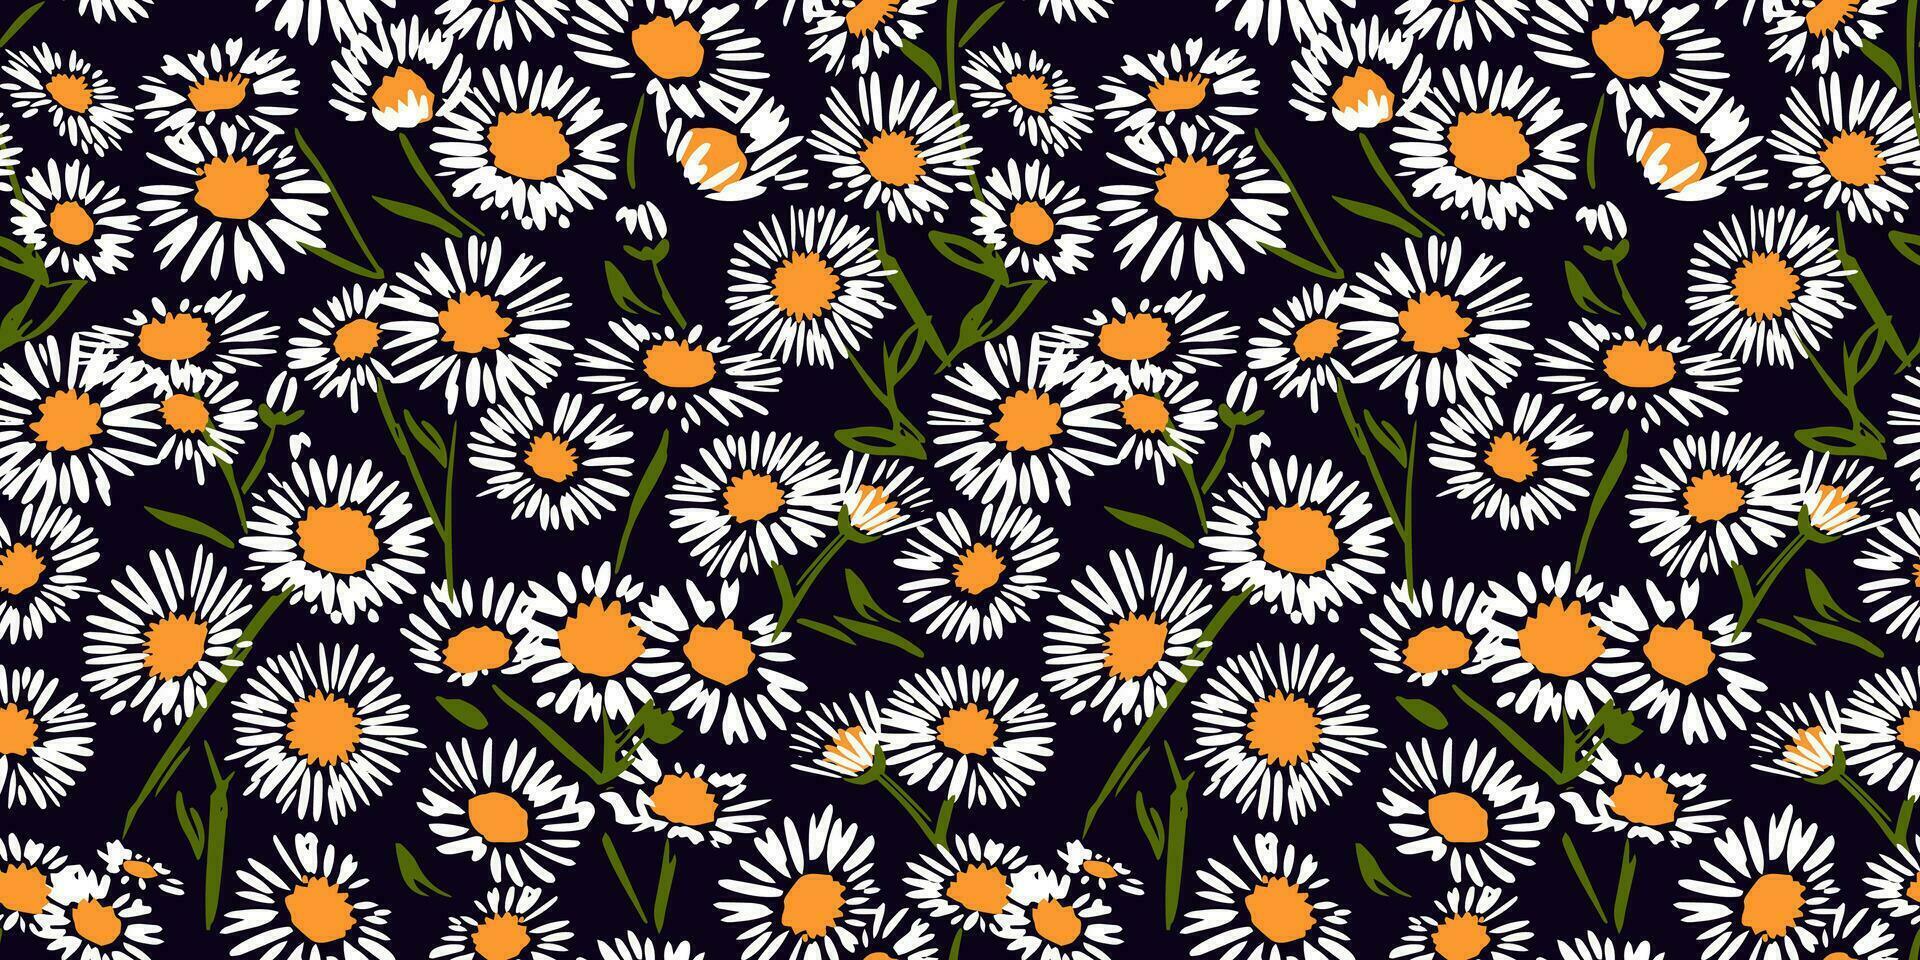 Simple artistic chamomile floral seamless pattern on a black background. Vector hand drawn ditsy, daisy flowers. Collage contemporary print. Design ornament for fashion, fabric, textile, wallpaper